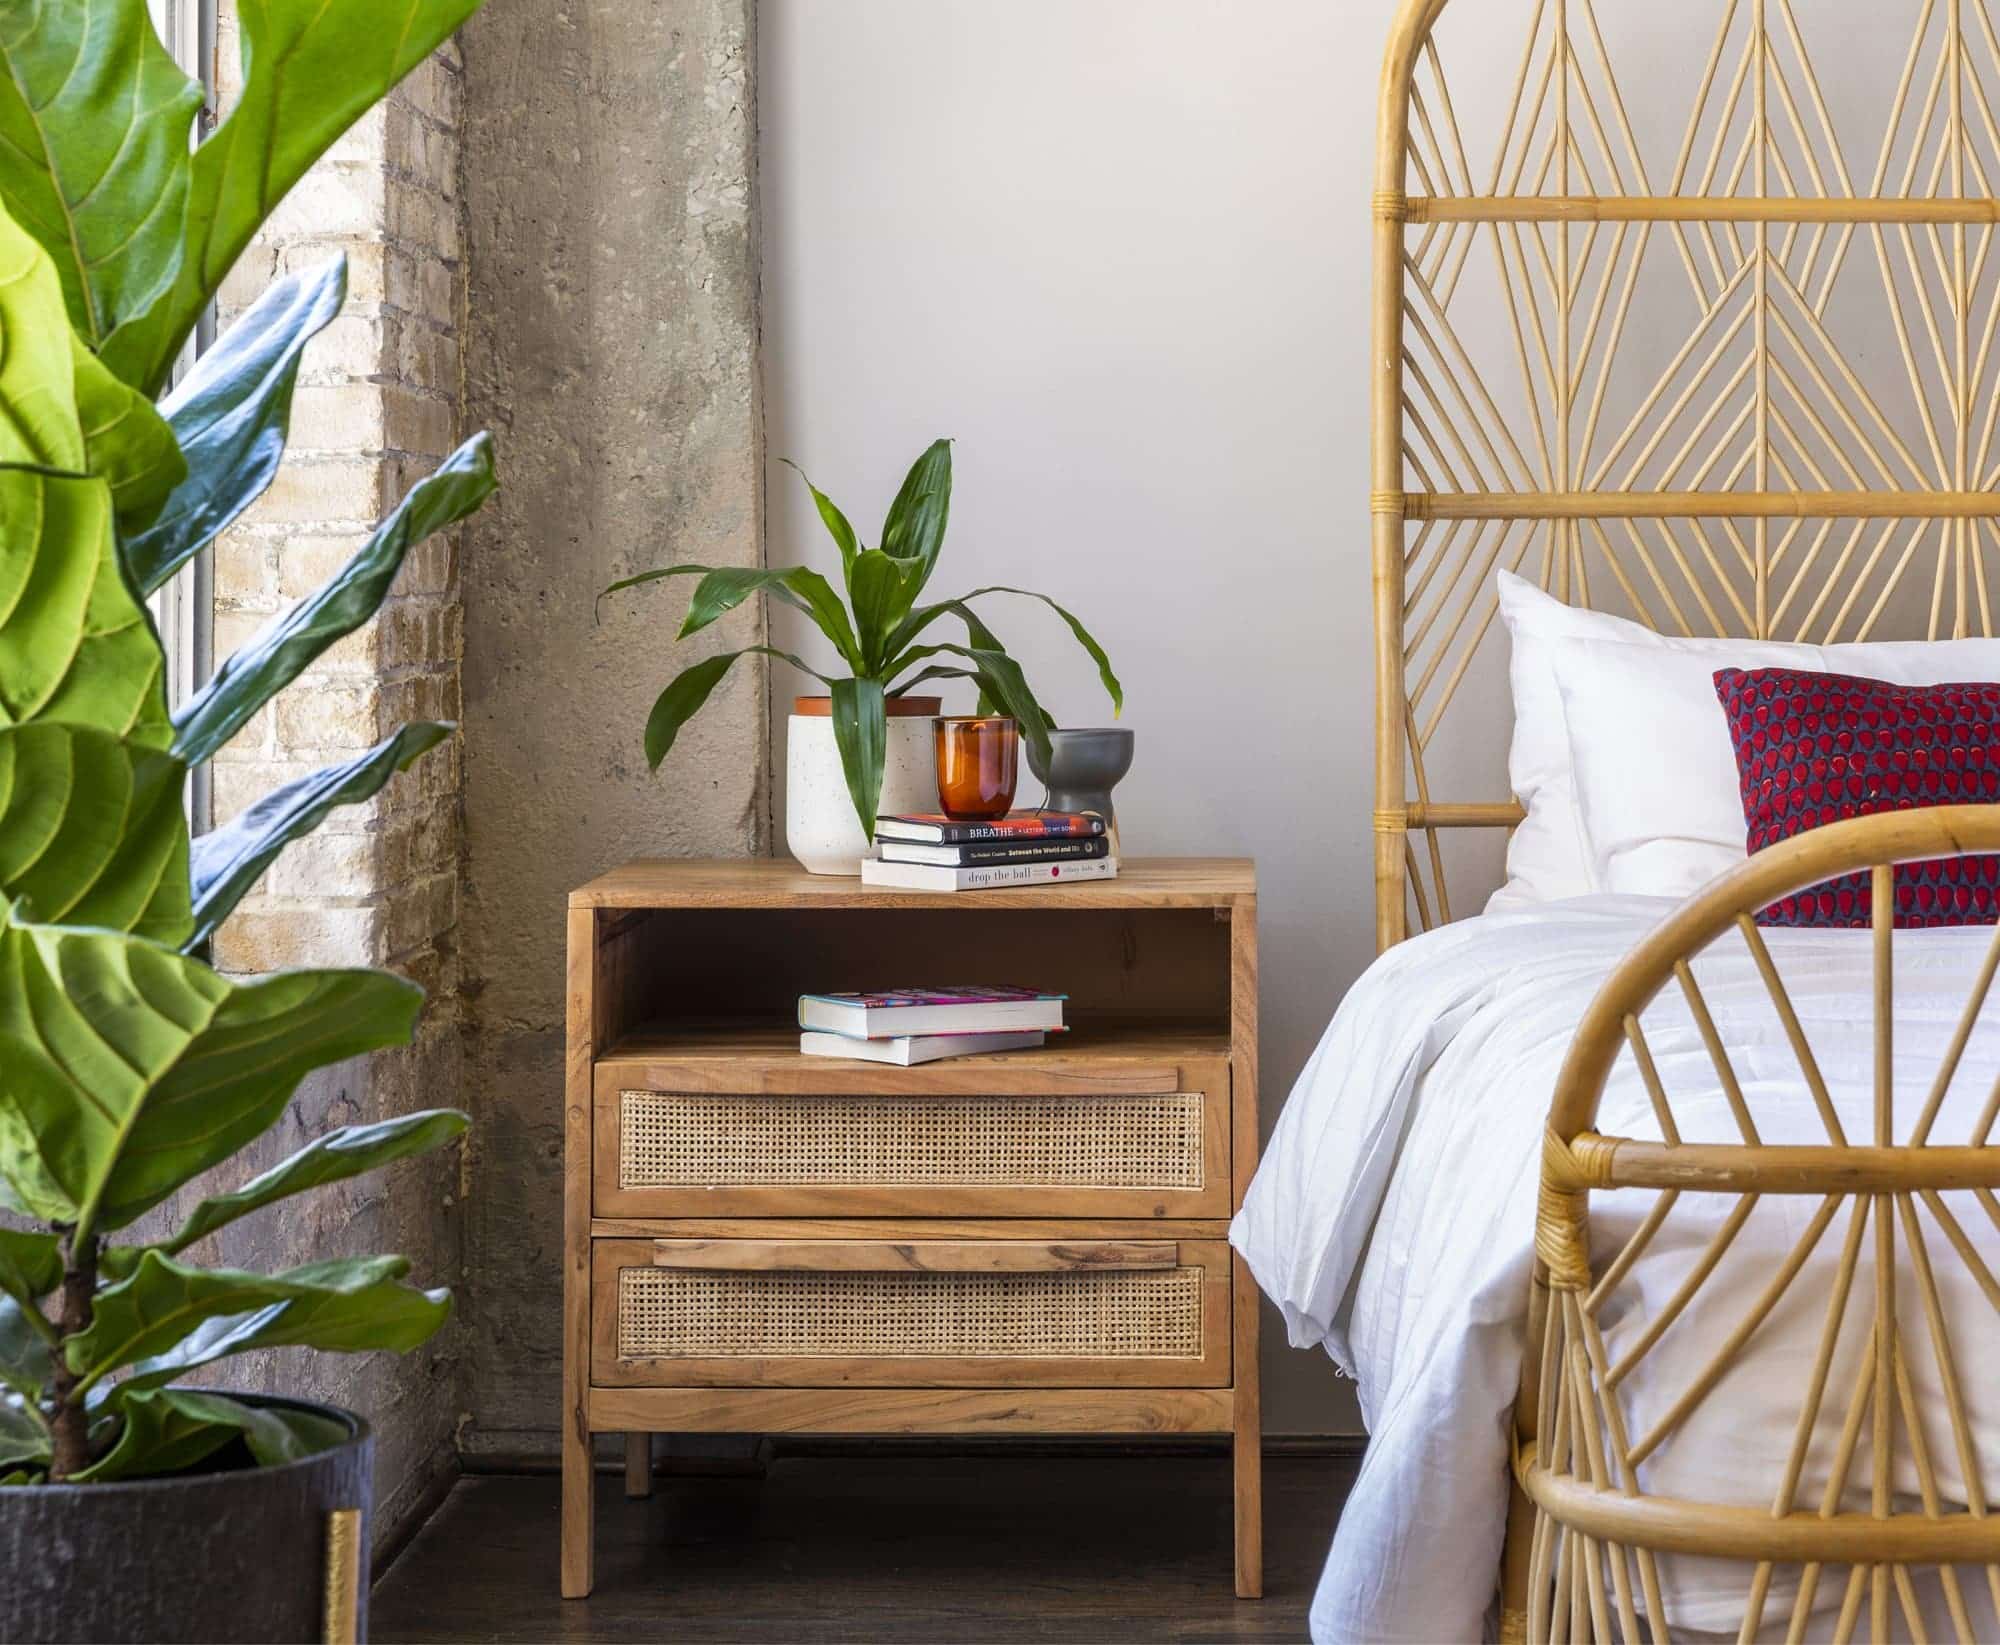 What Are the Key Features of a Boho Nightstand?